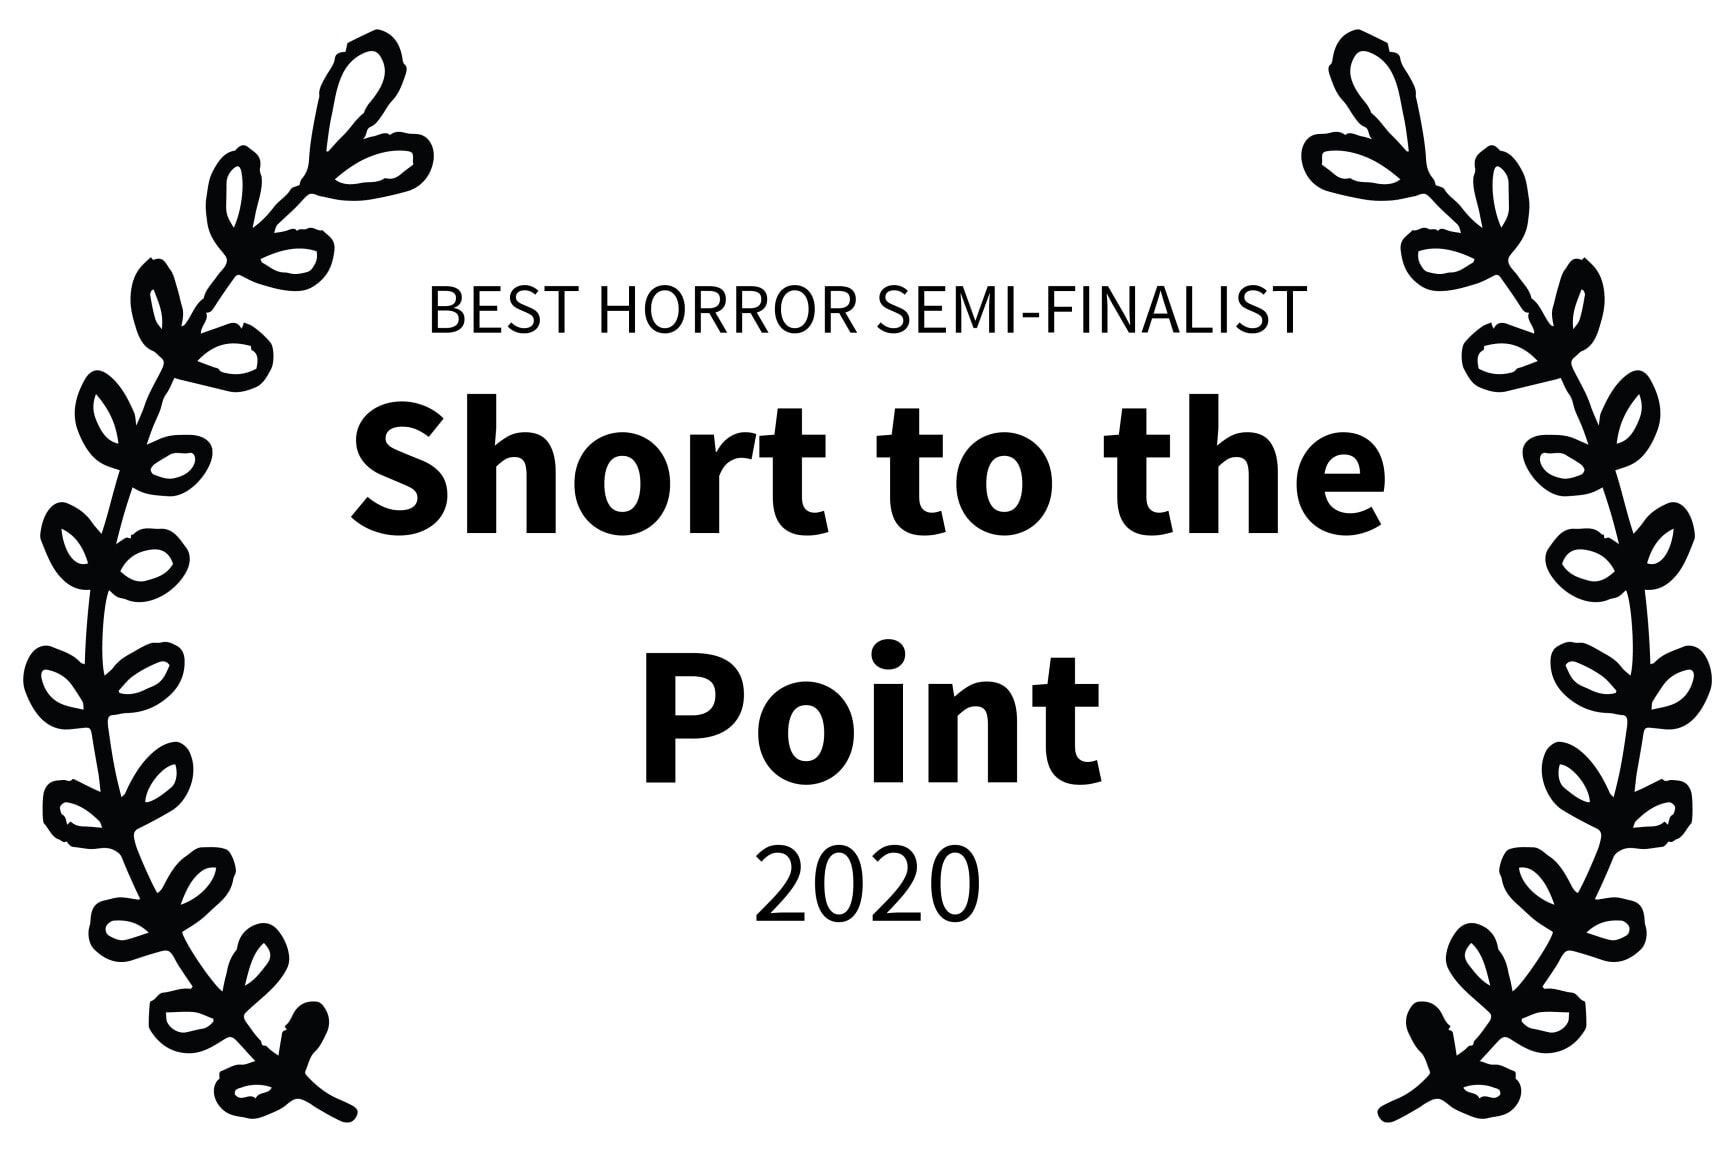 BEST HORROR SEMI-FINALIST - Short to the Point - 2020